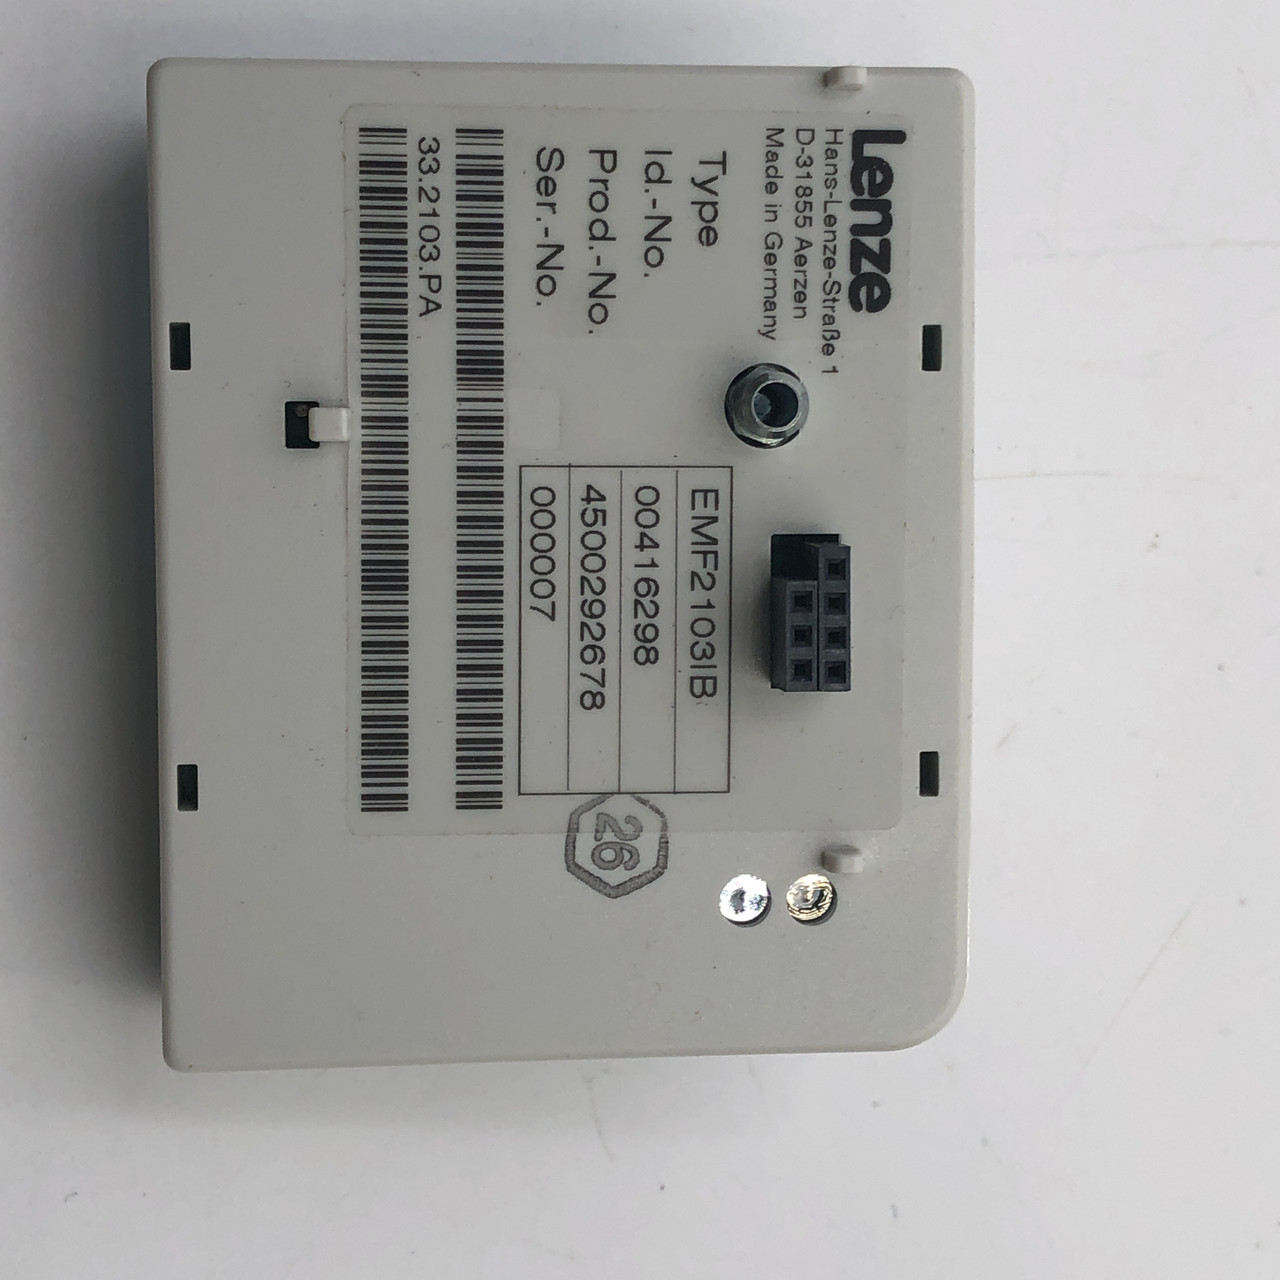 LENZE EMF2103IB PROGRAMMABLE FP INTERFACE MODULE FOR PLC DRIVES - NEW